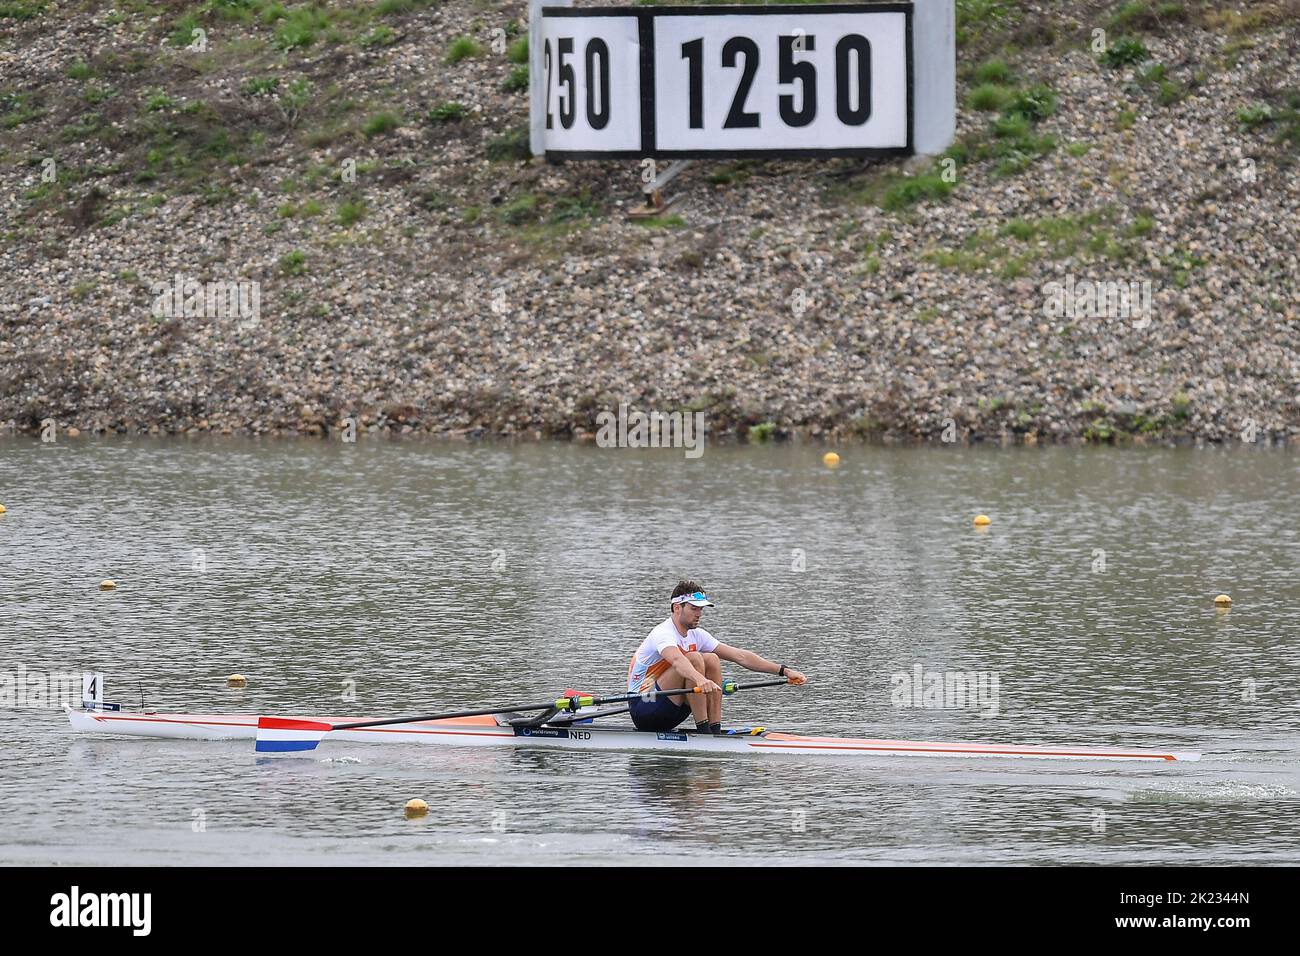 Racice, Czech Republic - September 21: Melvin Twellaar of Netherlands competing on Men's sculls quarter finals during Day 4 of the 2022 World Rowing Championships at the Labe Arena Racice on September 21, 2022 in Racice, Czech Republic. (Vit Cerny/CTK Photo/BSR Agency) Stock Photo